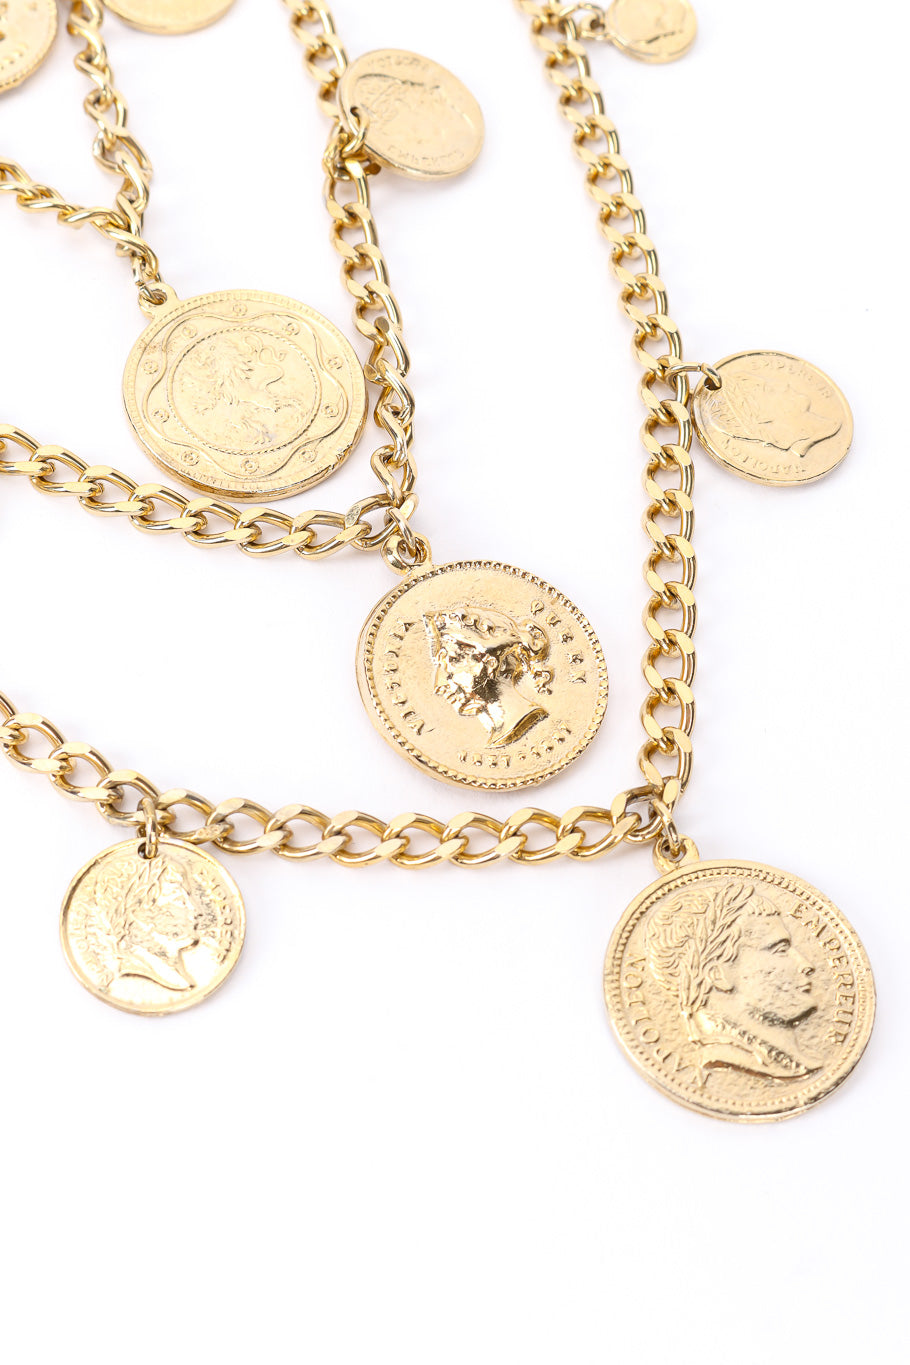 Coin pendant necklace by Goldette on white background coins close @recessla